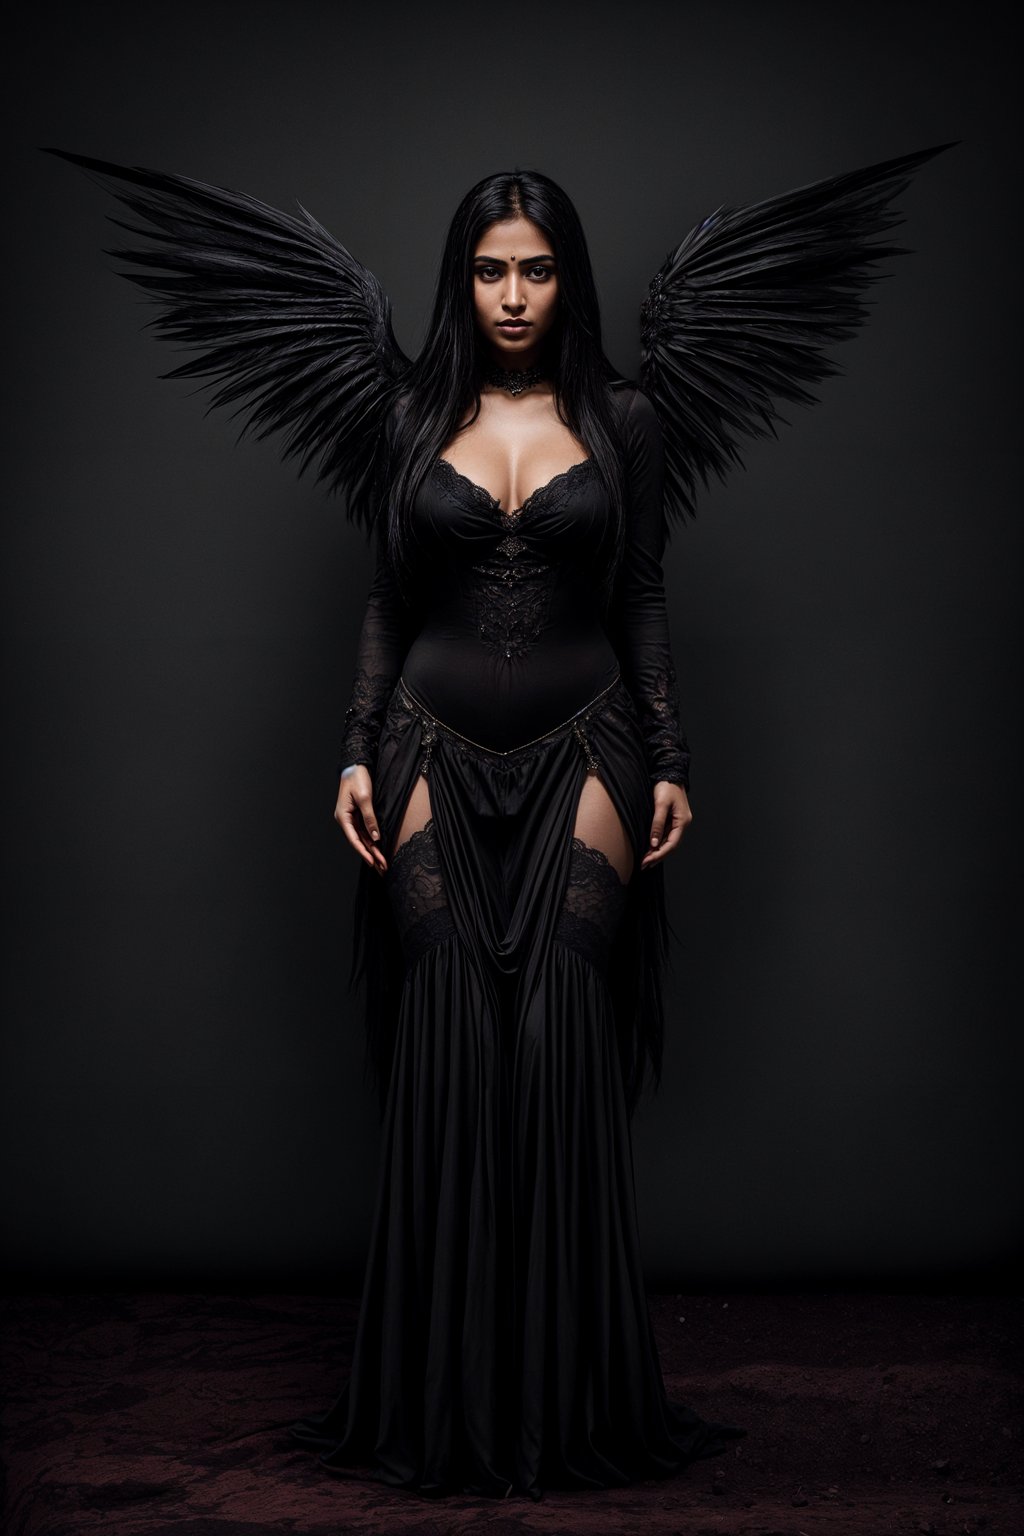 a woman dressed as an angel poses for a picture, dark angel, angel knight gothic girl, dark gothic dress, very sexy devil outfit, full body devil woman, gothic woman dressed in black and red, megan fox witch queen, raven winged female vampire, villainess has black angel wings, gothic outfit, tall female angel, gothic dress, fallen angel, winged woman angel, fishnet stockings